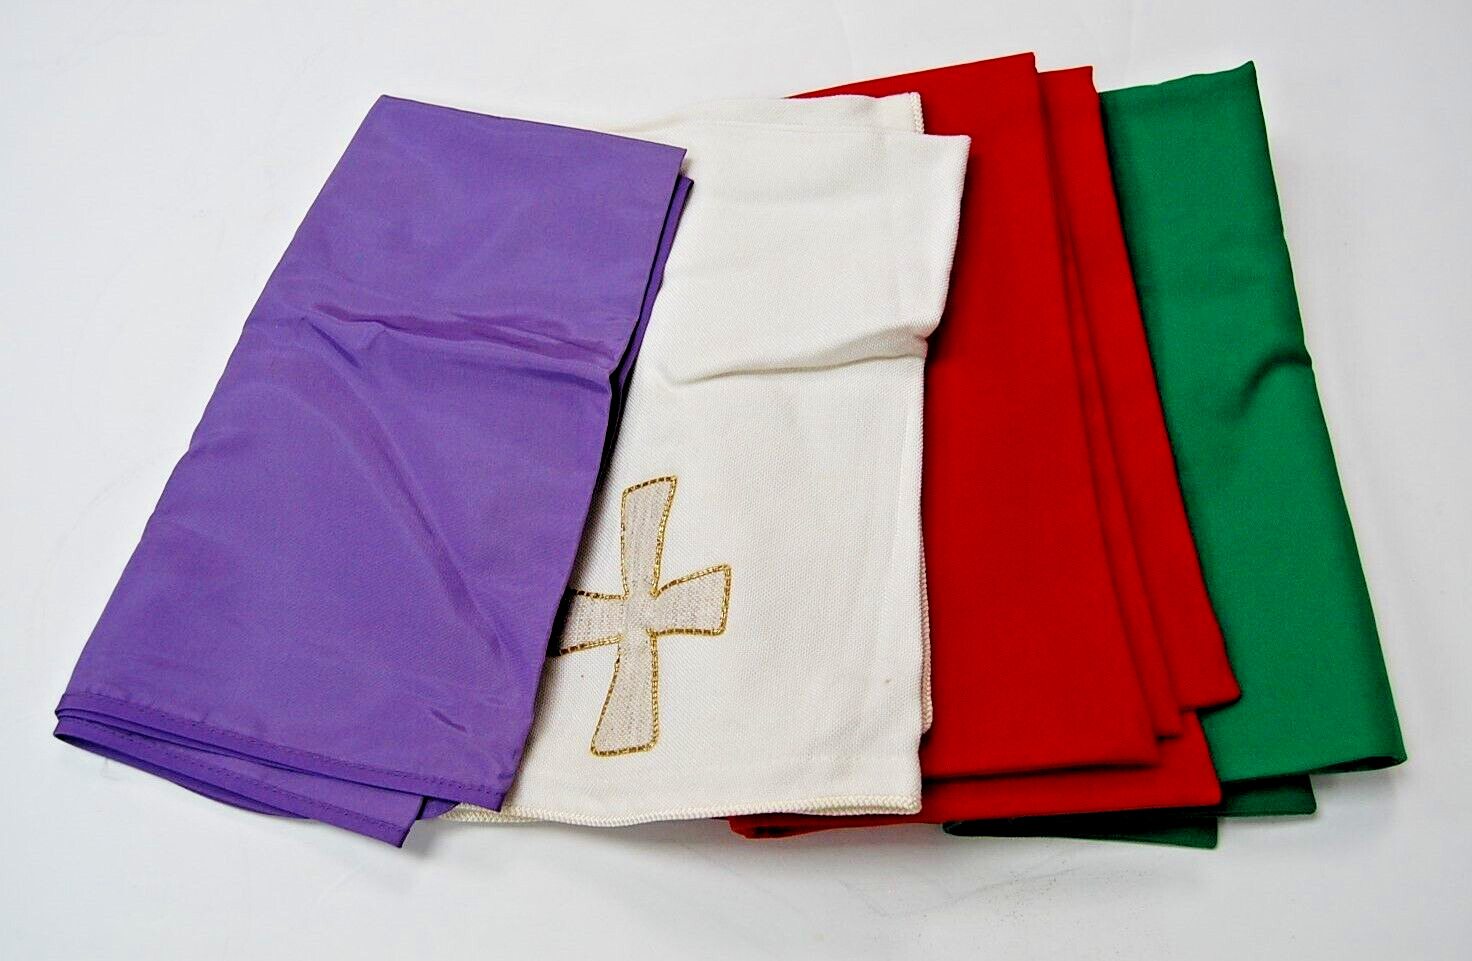 SET OF 4 OLDER CHURCH CHALICE VEILS SOLD AS SHOWN (B)